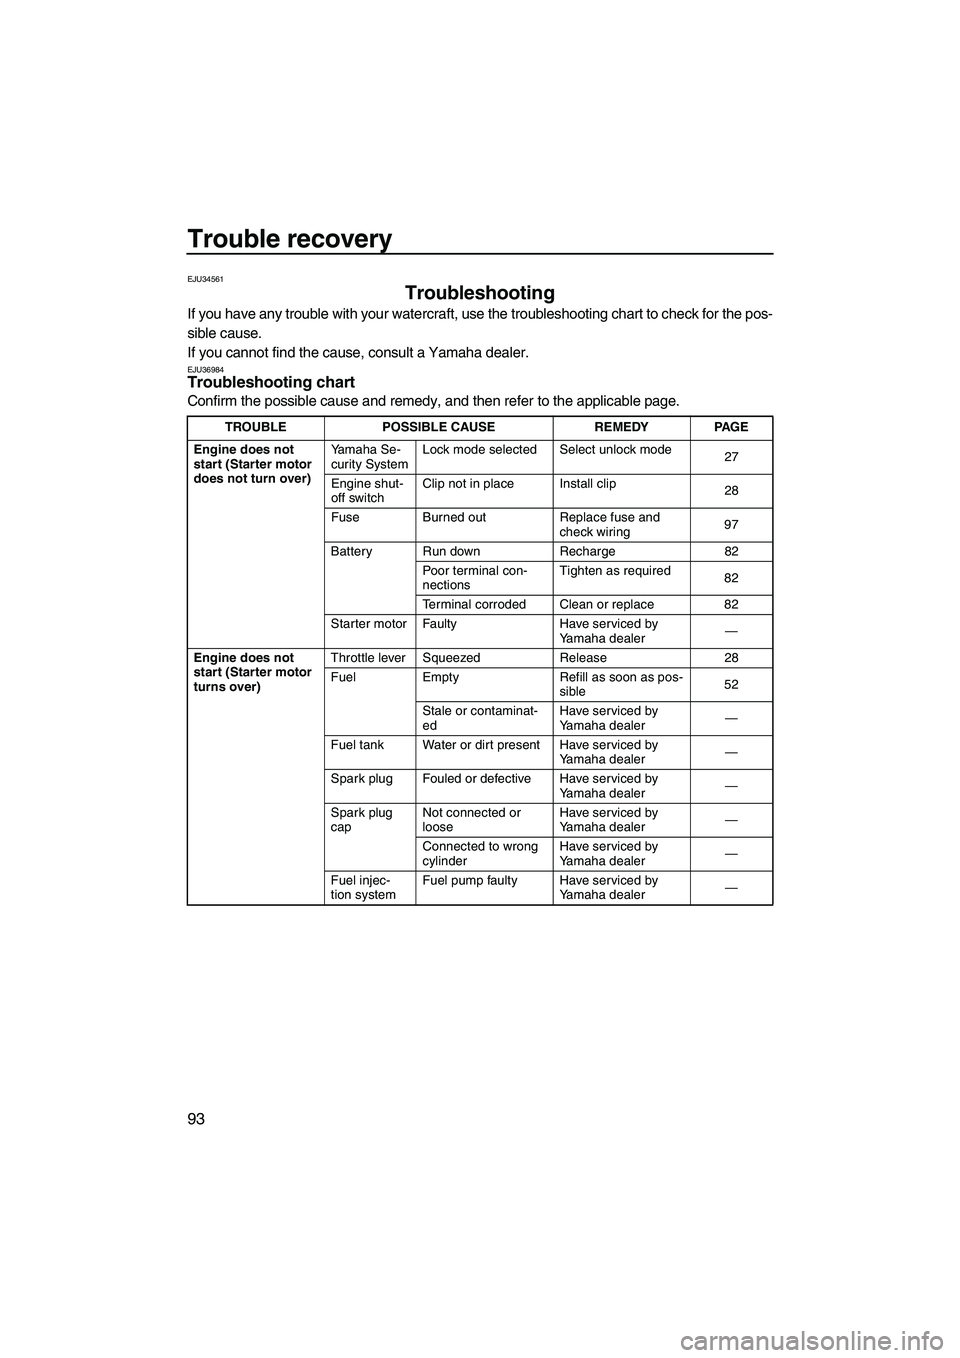 YAMAHA FX HO 2010  Owners Manual Trouble recovery
93
EJU34561
Troubleshooting 
If you have any trouble with your watercraft, use the troubleshooting chart to check for the pos-
sible cause.
If you cannot find the cause, consult a Yam